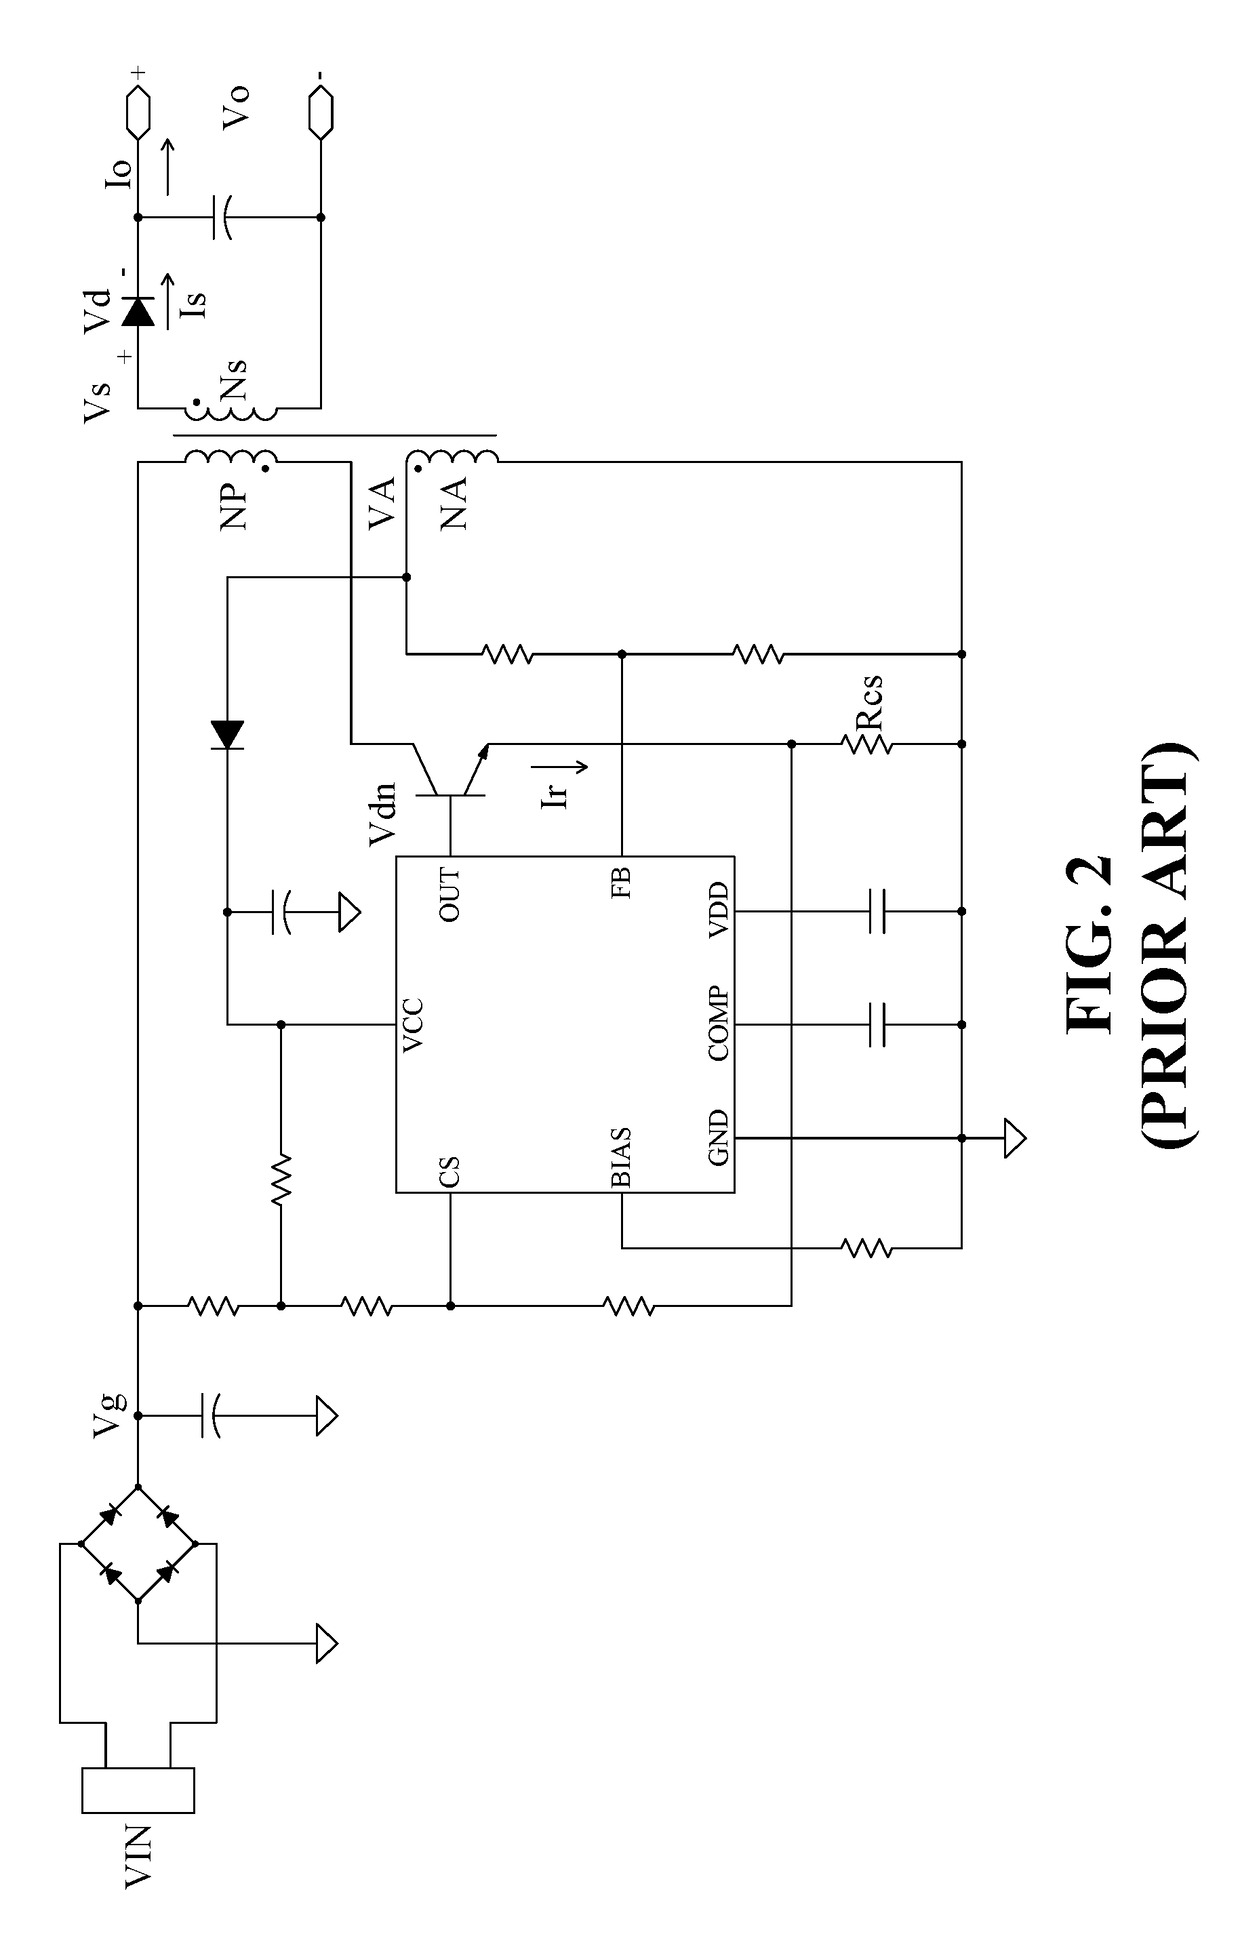 Flyback converter with no need for the auxiliary winding